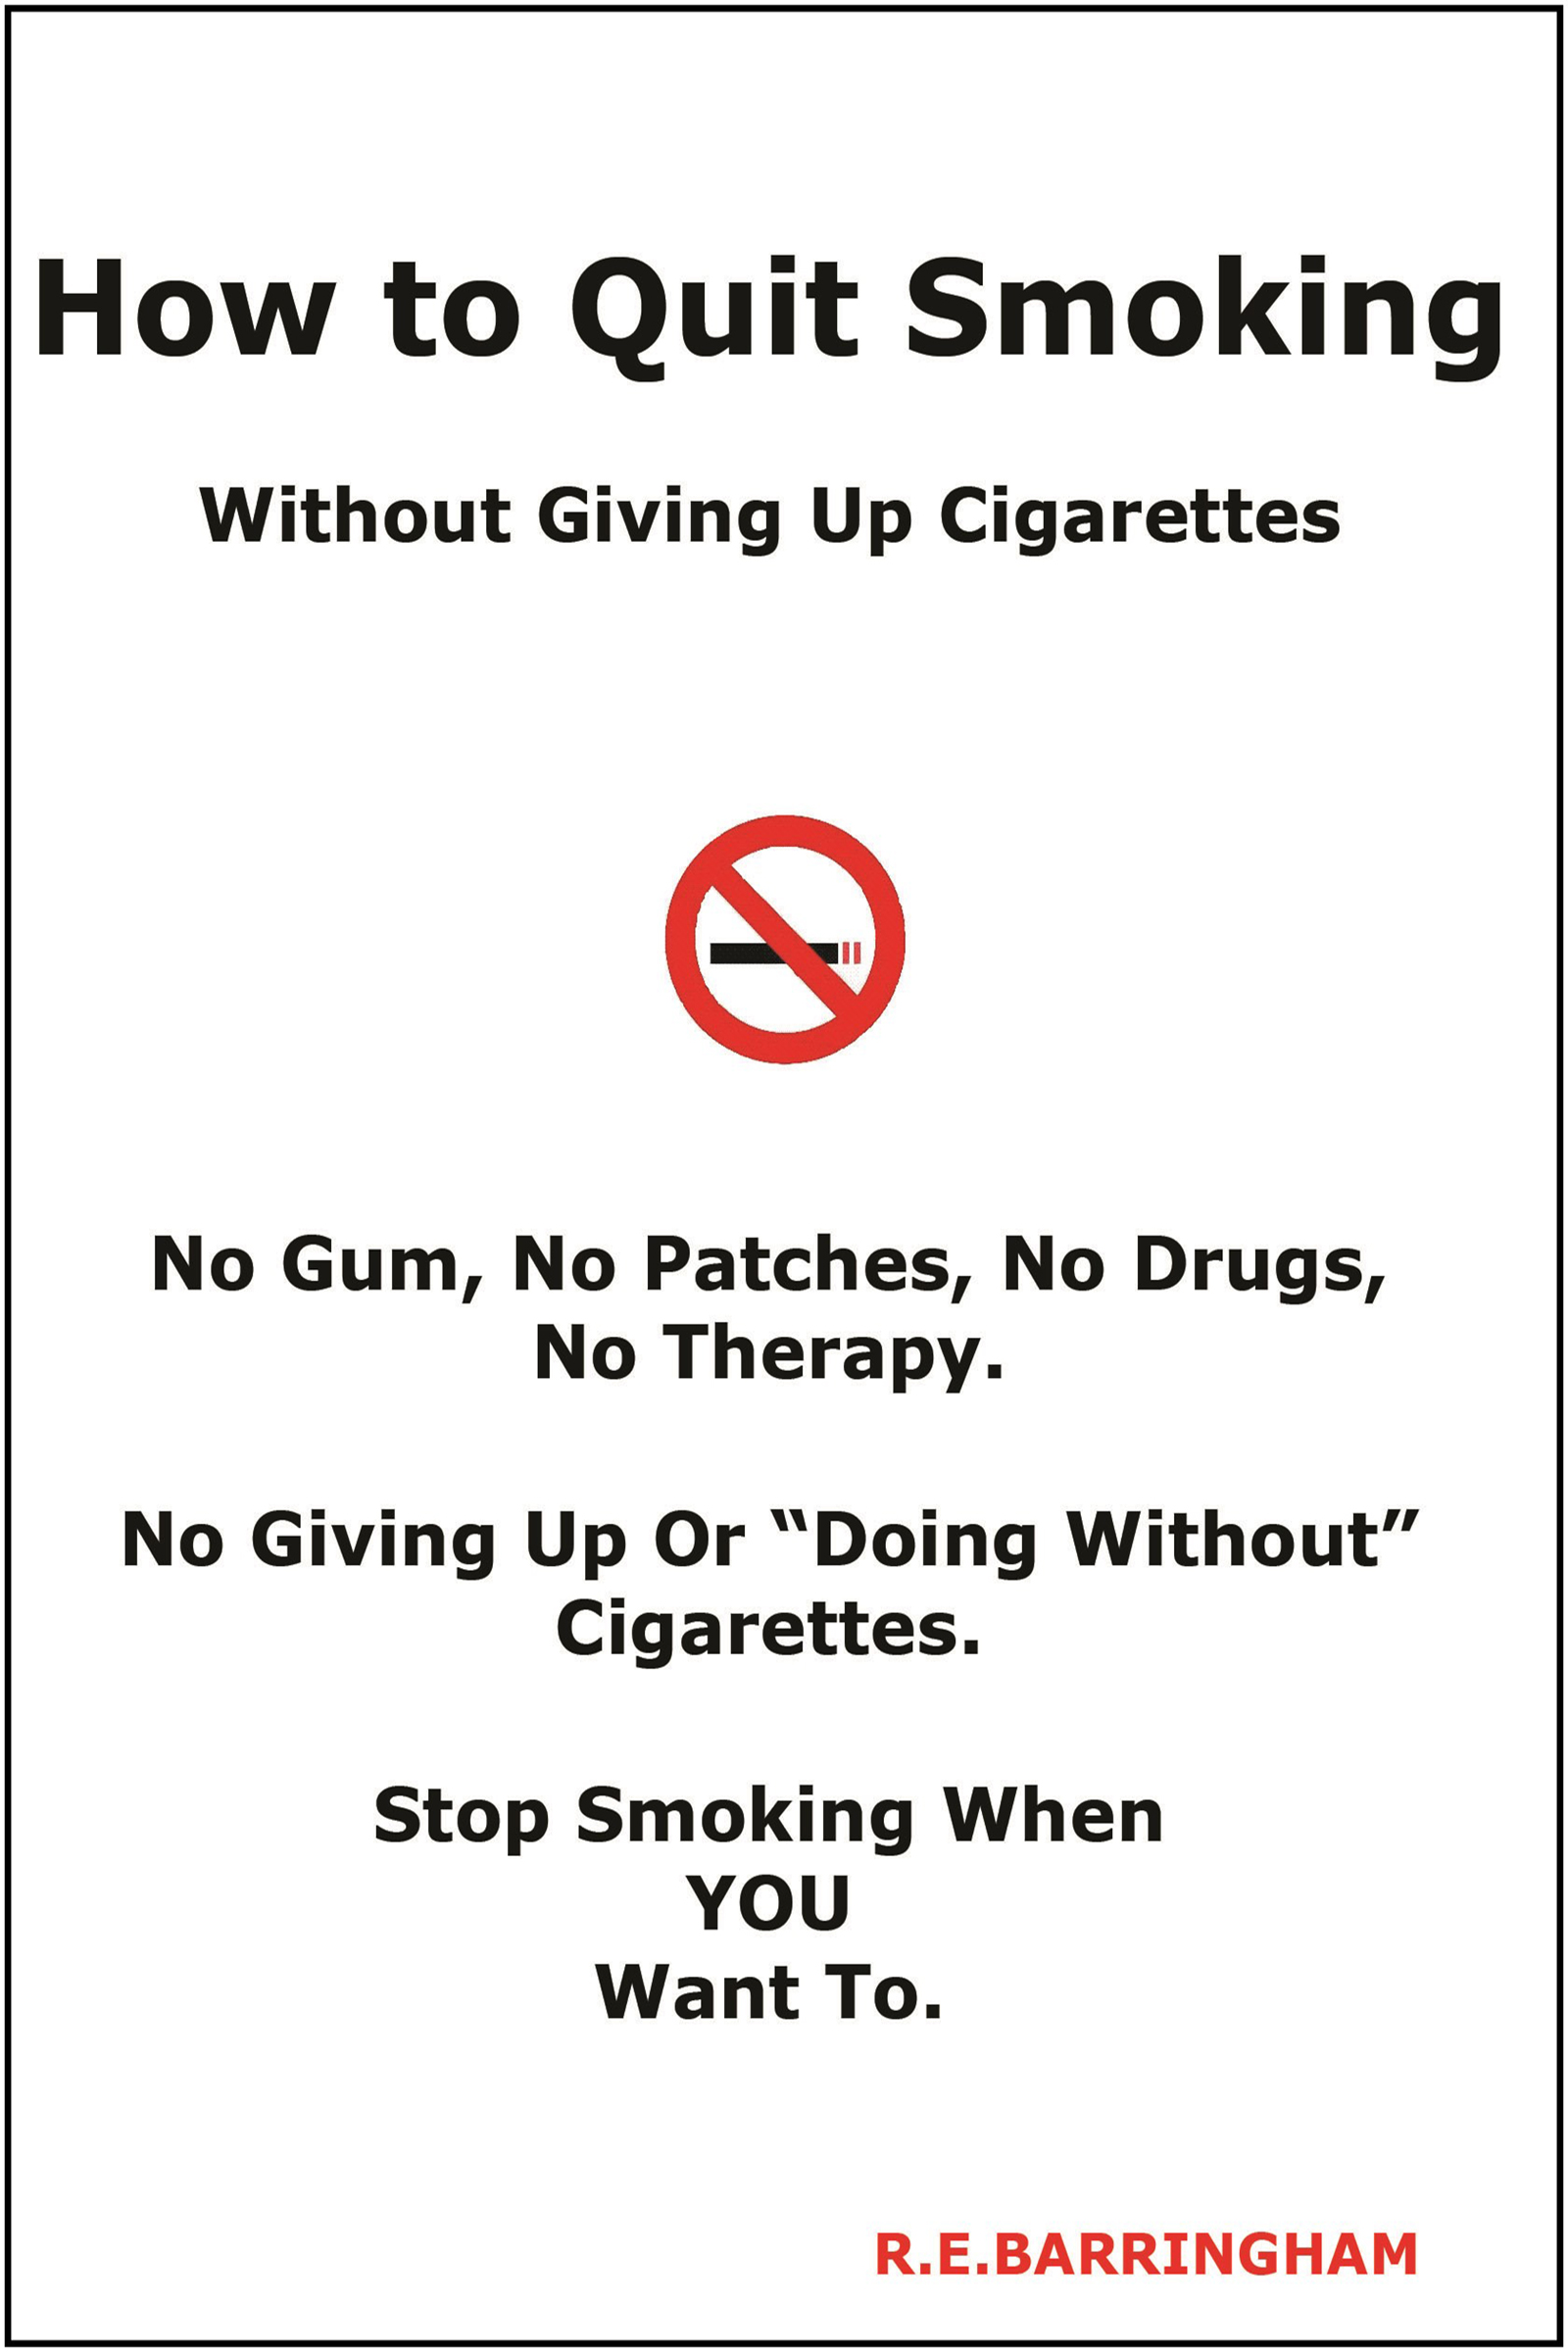 How to quit smoking without giving up cigarettes